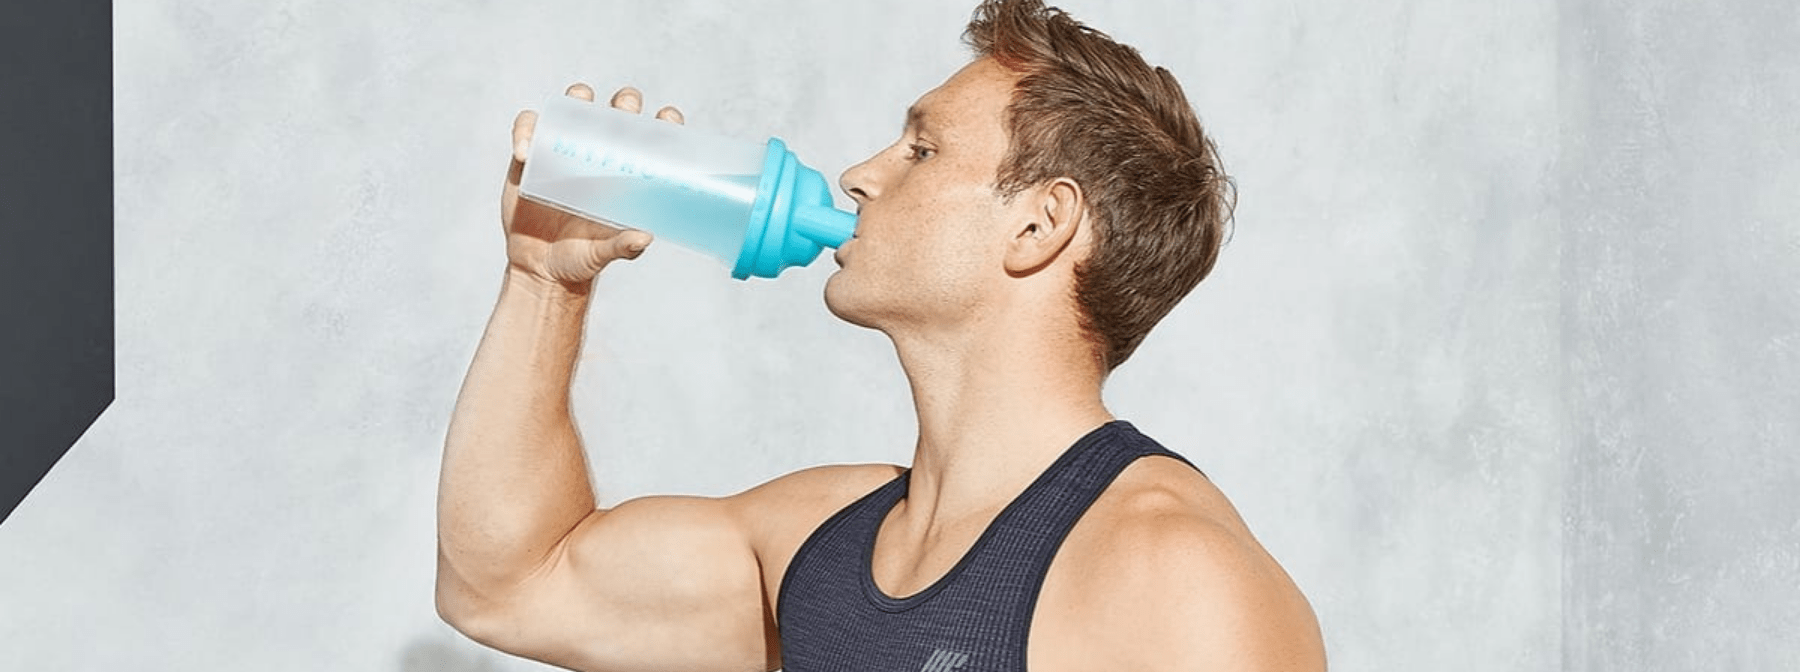 Benefits & Side Effects of BCAA (Branched-Chain Amino Acids)